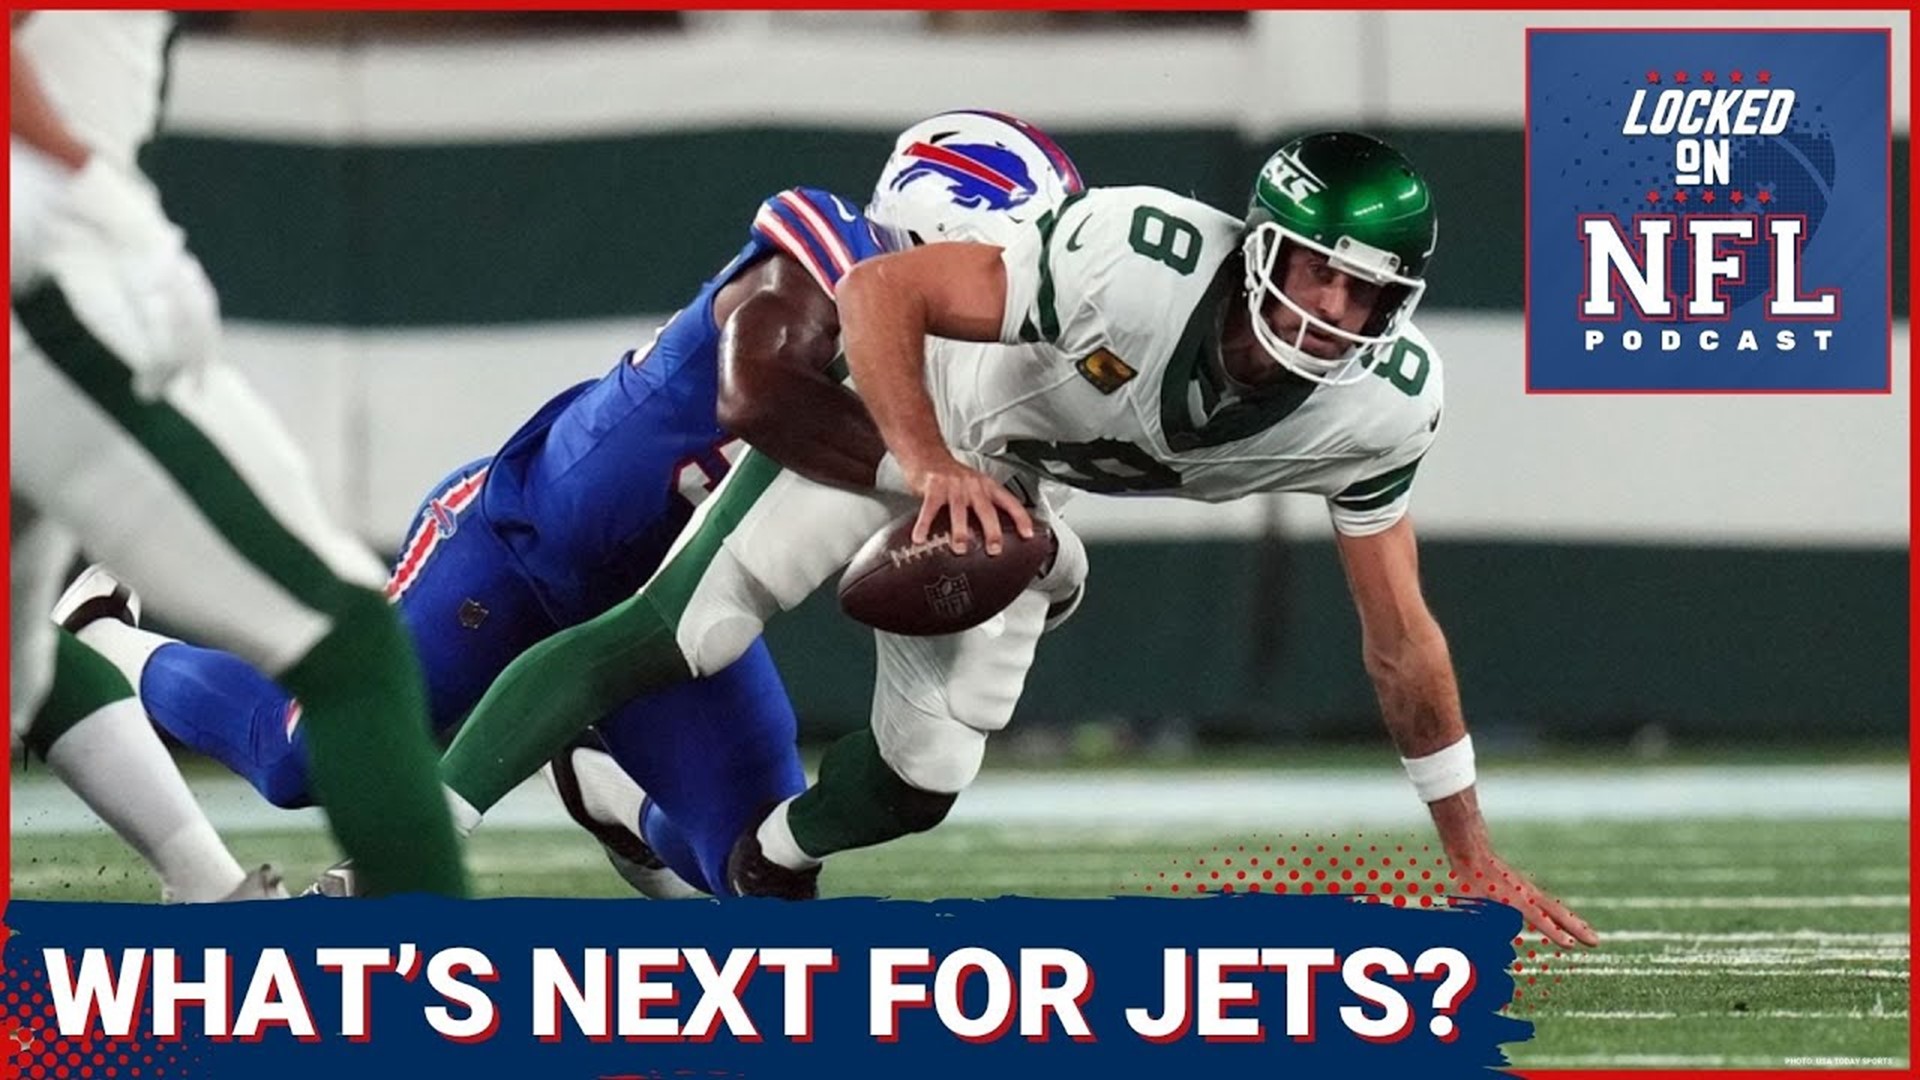 What should the New York Jets do following Aaron Rodgers' season ending Achilles injury? James Rapien and Tony Wiggins discuss Tom Brady.